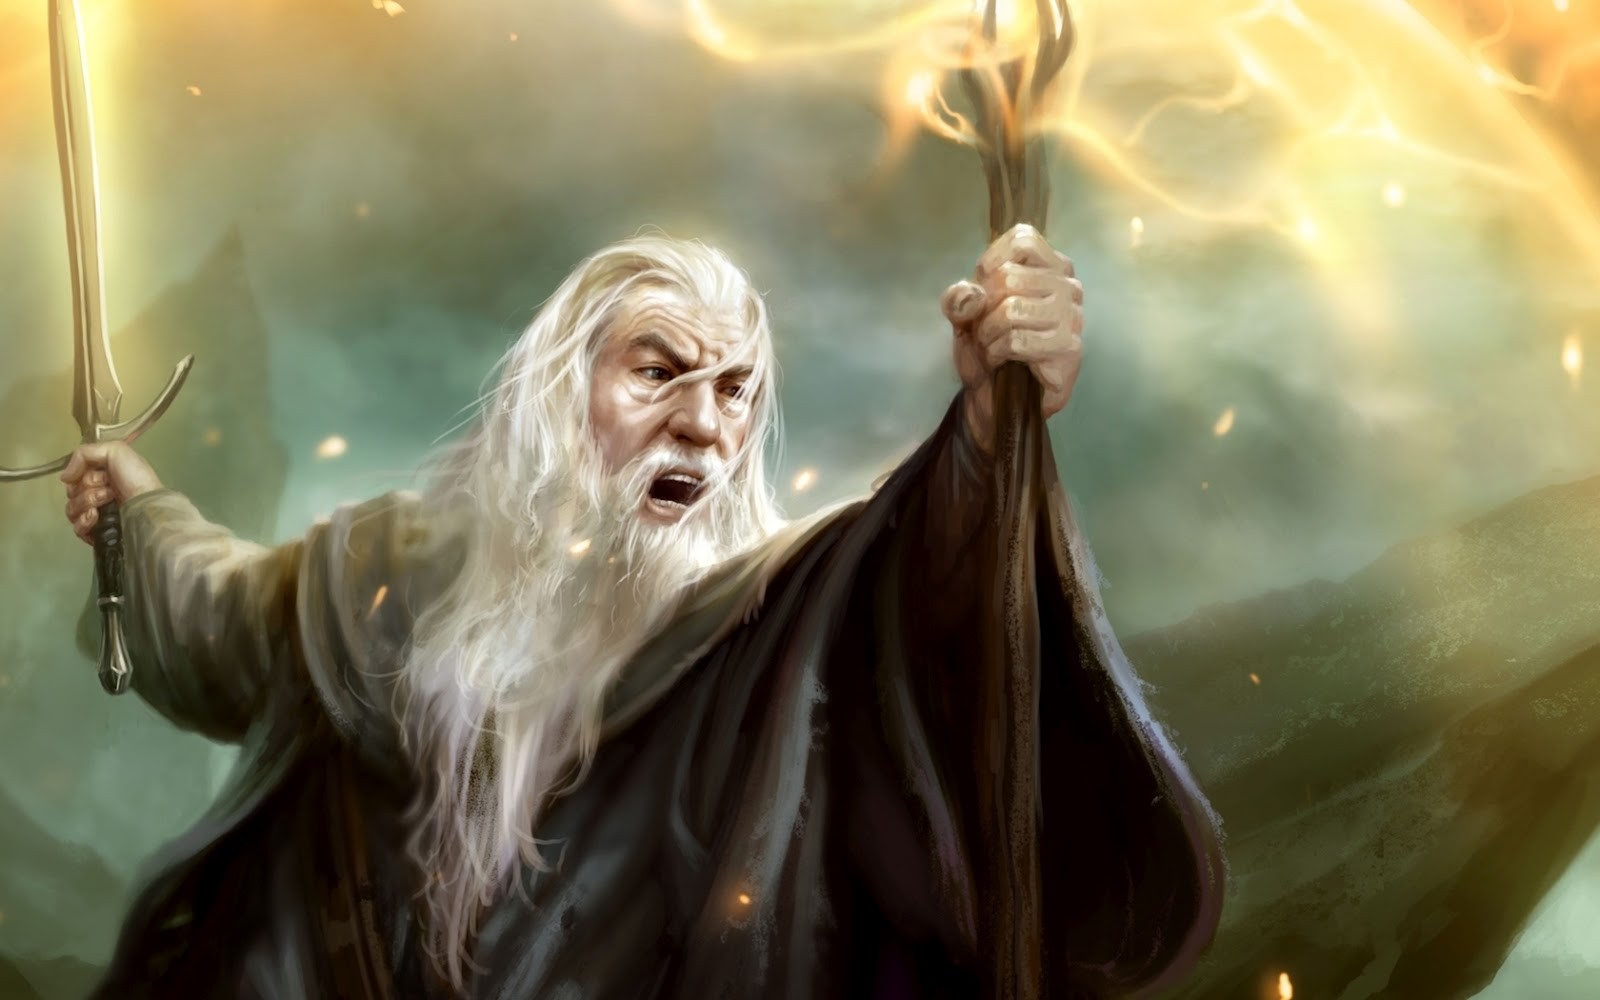 General 1600x1000 Guardians of Middle-earth The Lord of the Rings Gandalf wizard fantasy men fantasy art staff sword